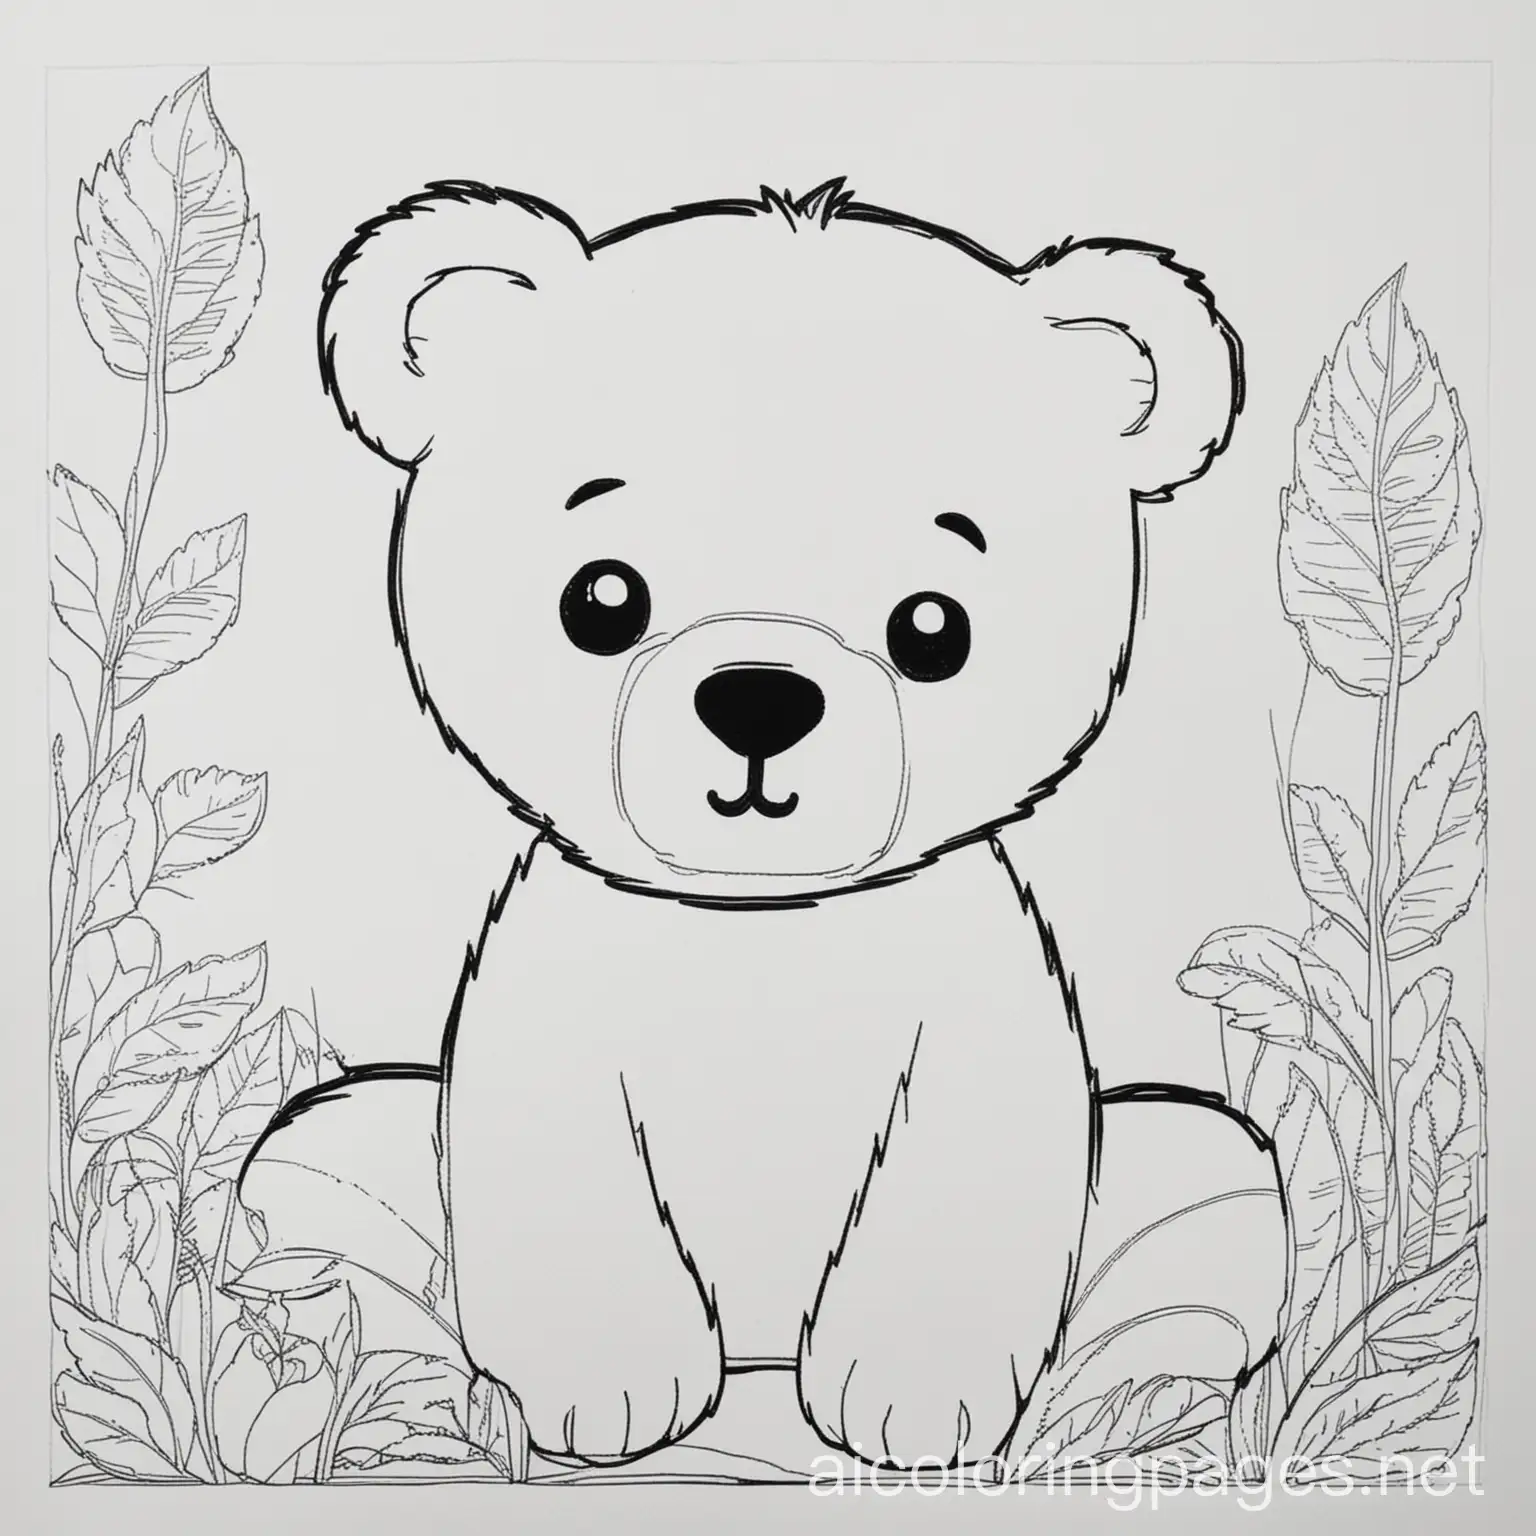 a cute BEAR
, Coloring Page, black and white, line art, white background, Simplicity, bold outline, no shading, Ample White Space. The background of the coloring page is plain white to make it easy for young children to color within the lines. The outlines of all the subjects are easy to distinguish, making it simple for kids to color without too much difficulty, Coloring Page, black and white, line art, white background, Simplicity, Ample White Space. The background of the coloring page is plain white to make it easy for young children to color within the lines. The outlines of all the subjects are easy to distinguish, making it simple for kids to color without too much difficulty, Coloring Page, black and white, line art, white background, Simplicity, Ample White Space. The background of the coloring page is plain white to make it easy for young children to color within the lines. The outlines of all the subjects are easy to distinguish, making it simple for kids to color without too much difficulty